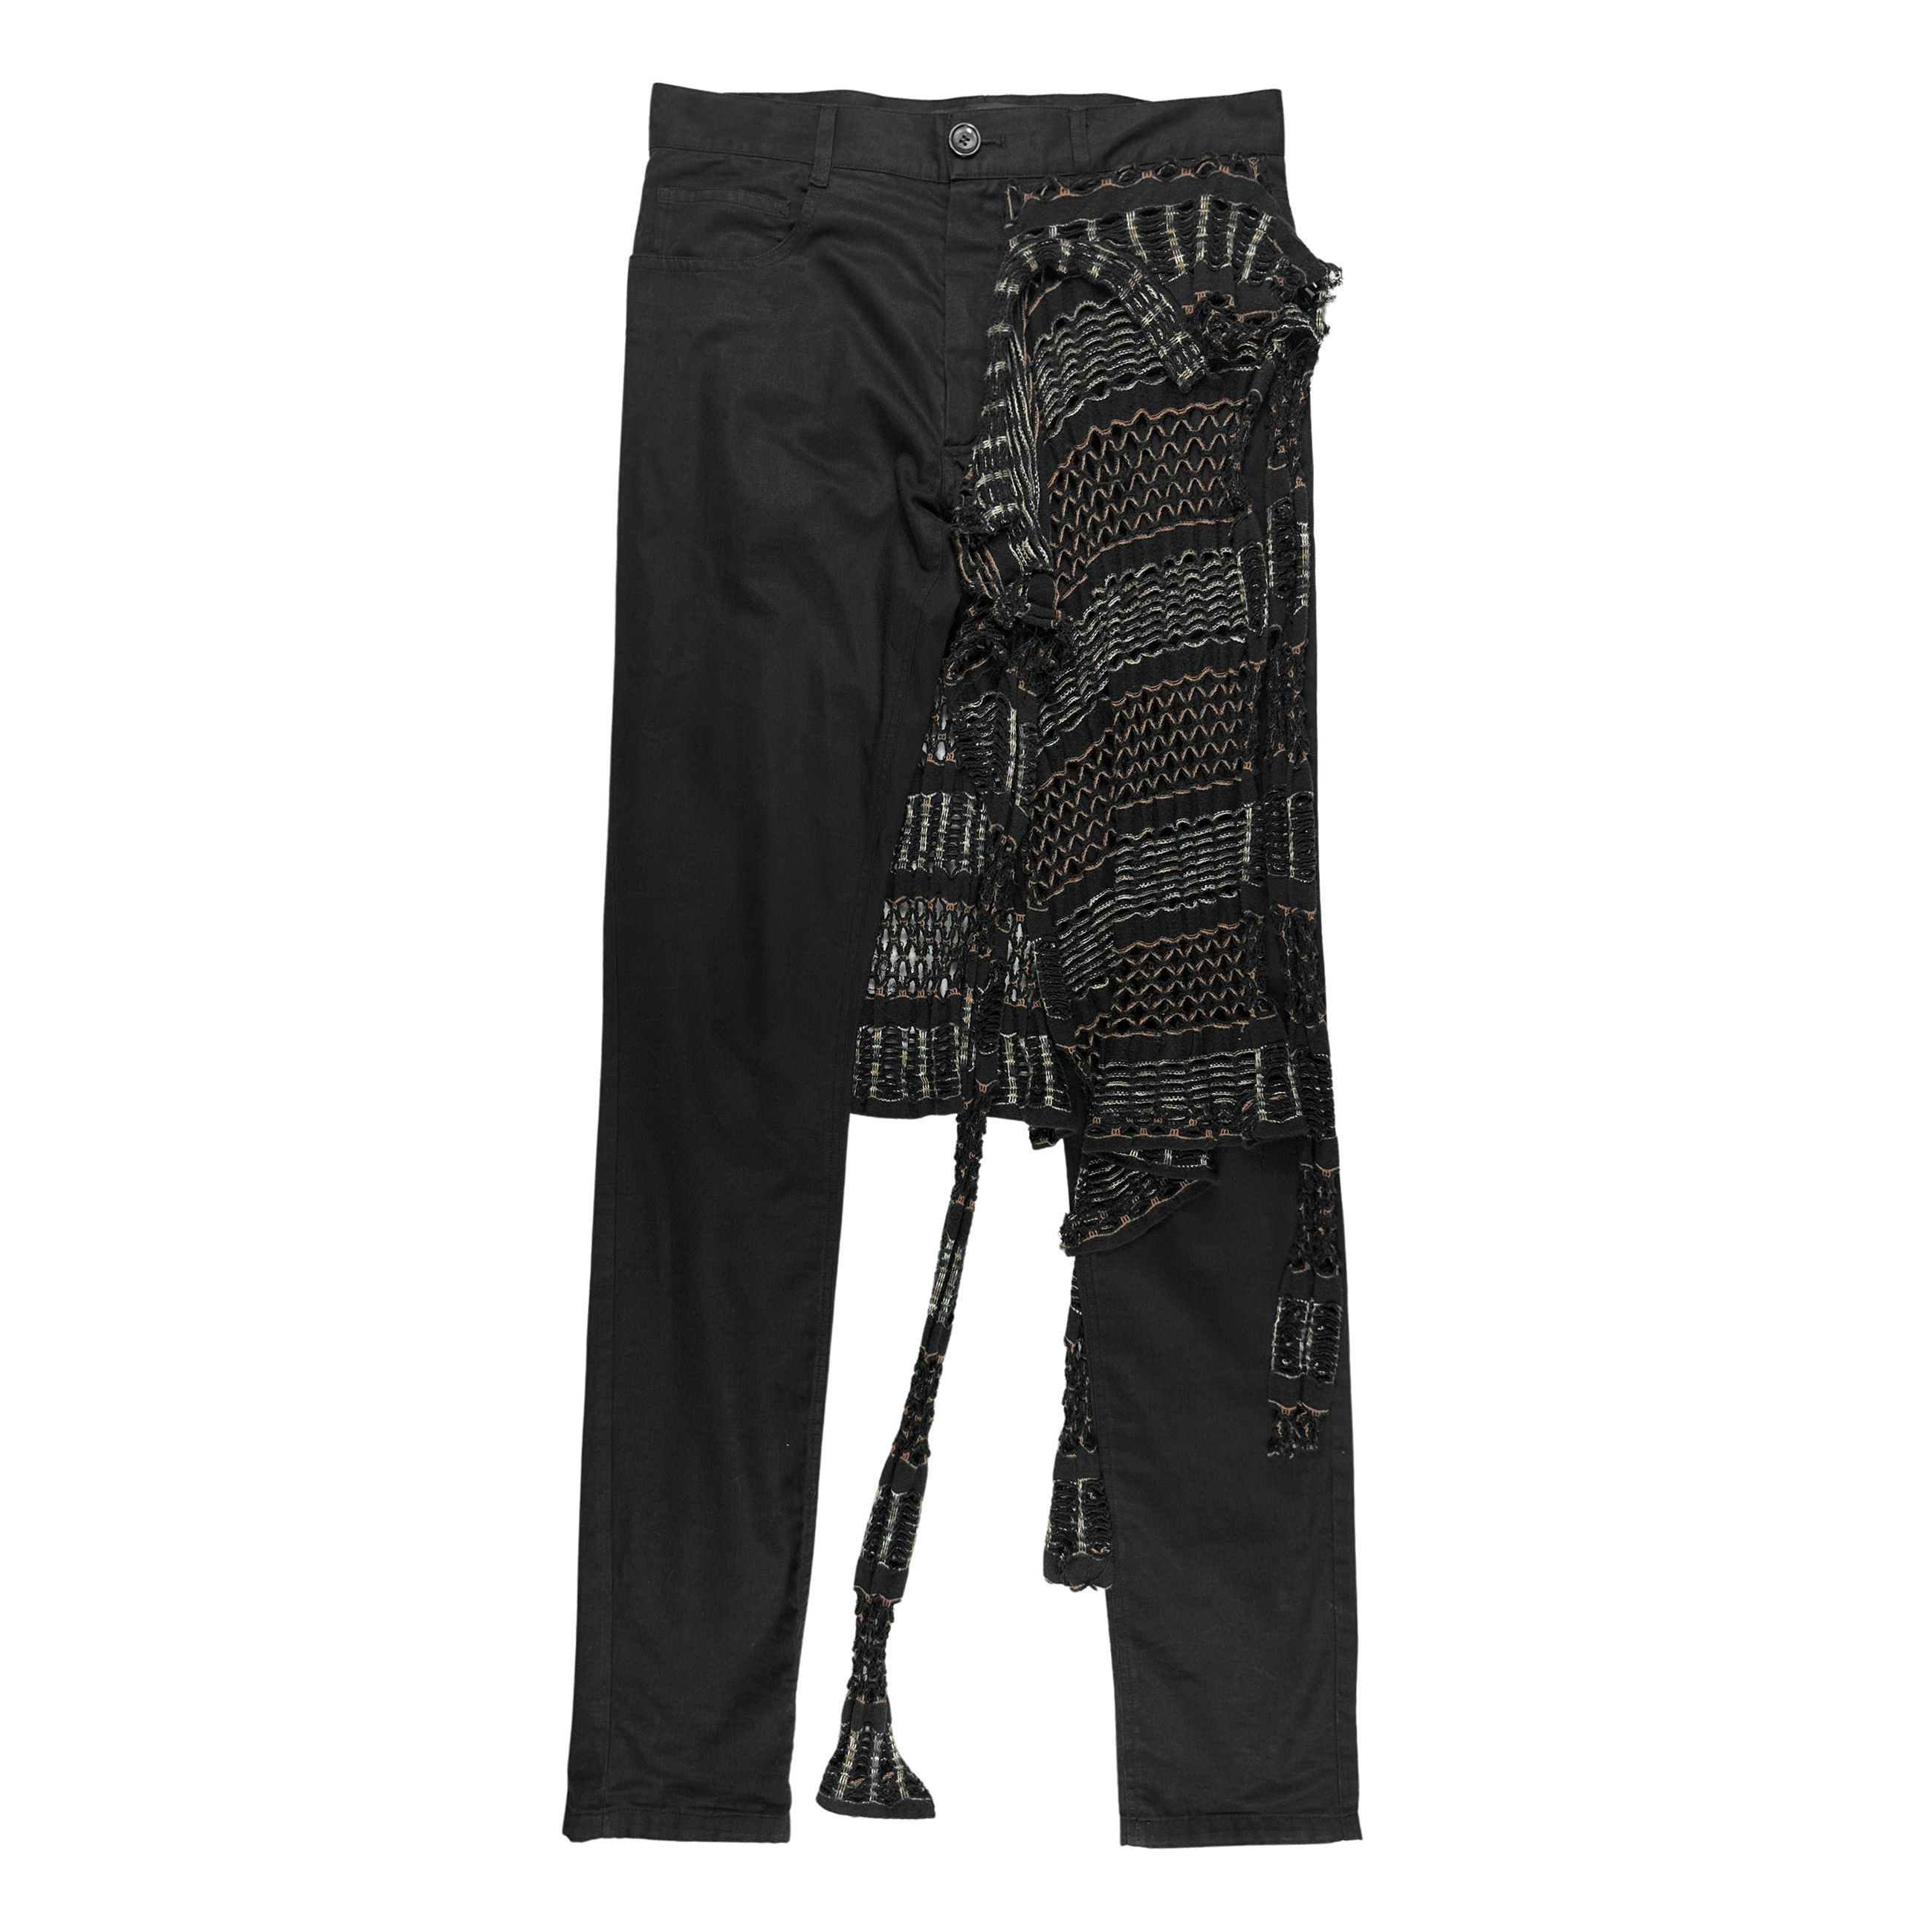 Raf Simons Relaxed Fit Denim Pants With Cut Out Knee Patches in Black